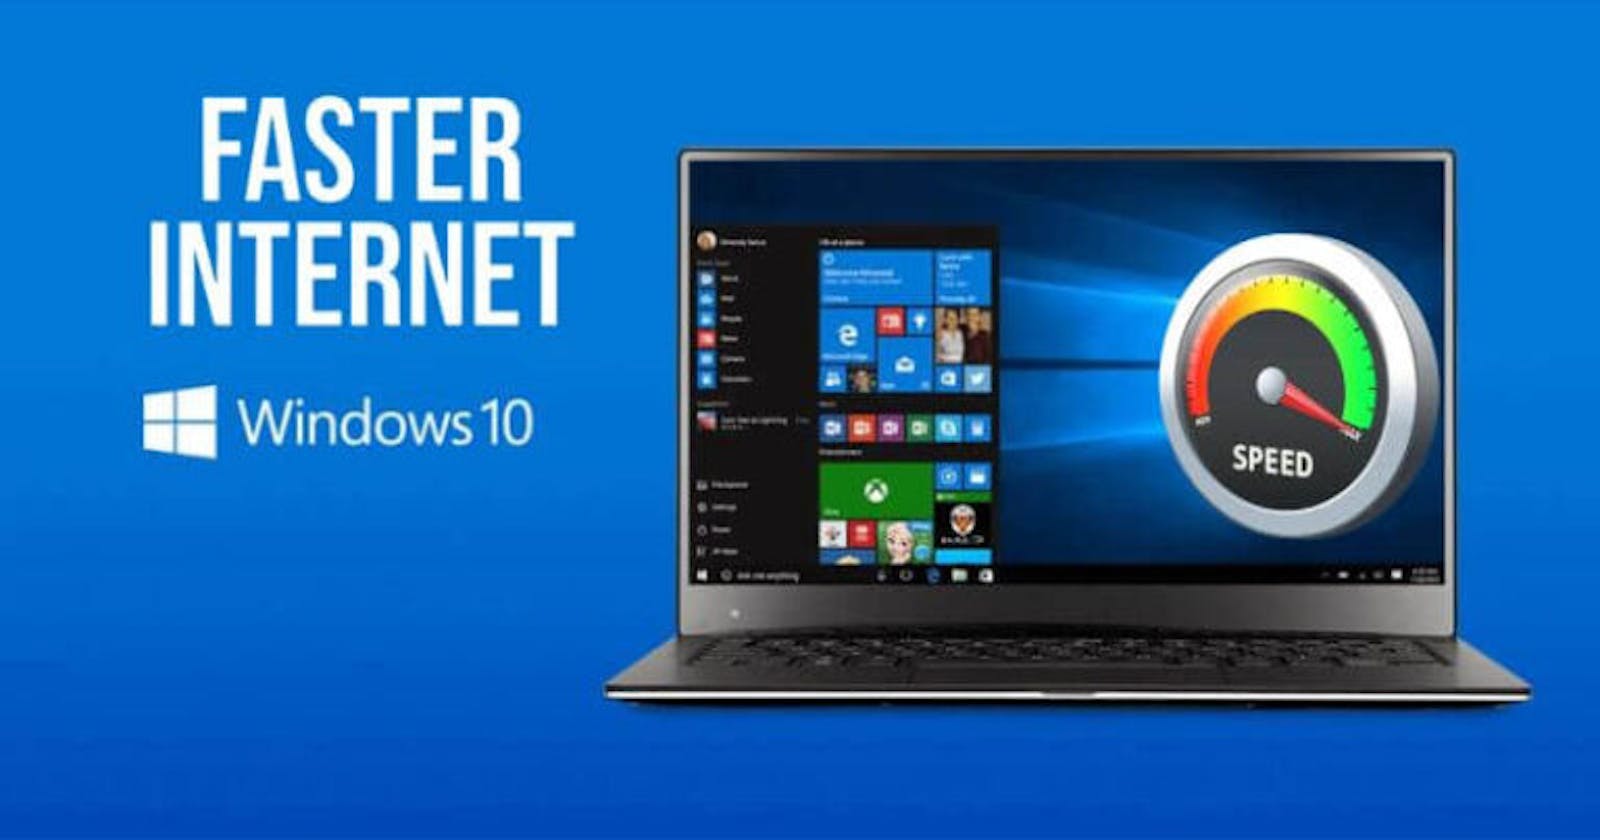 How to Increase Internet Speed in Windows 10 – 10 Ways